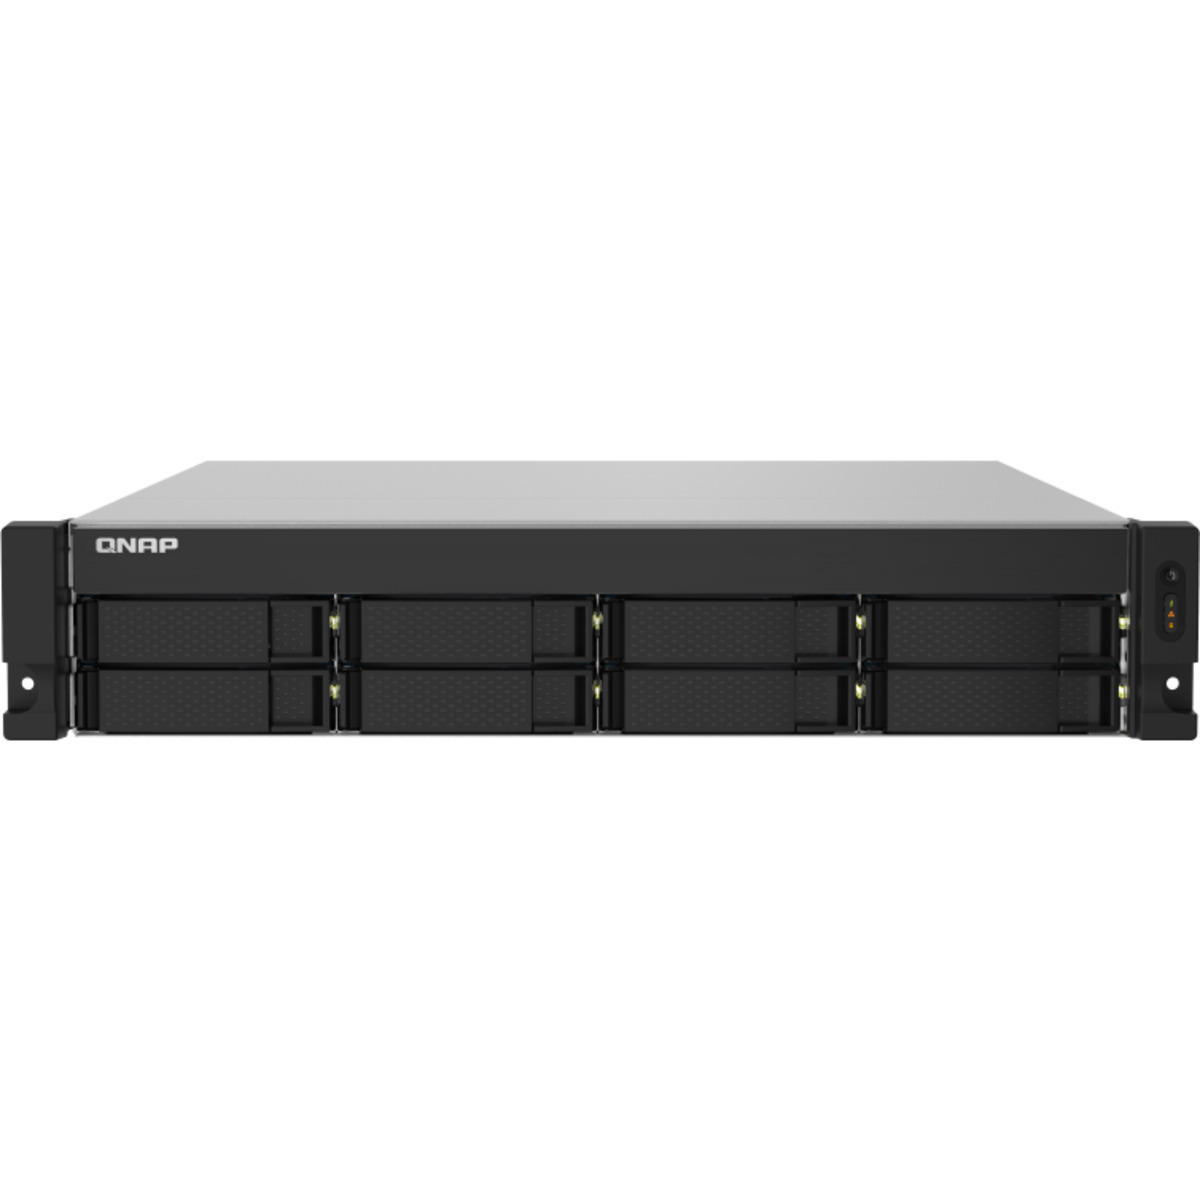 QNAP TS-832PXU-RP 60tb 8-Bay RackMount Personal / Basic Home / Small Office NAS - Network Attached Storage Device 6x10tb Seagate EXOS X18 ST10000NM018G 3.5 7200rpm SATA 6Gb/s HDD ENTERPRISE Class Drives Installed - Burn-In Tested - FREE RAM UPGRADE TS-832PXU-RP